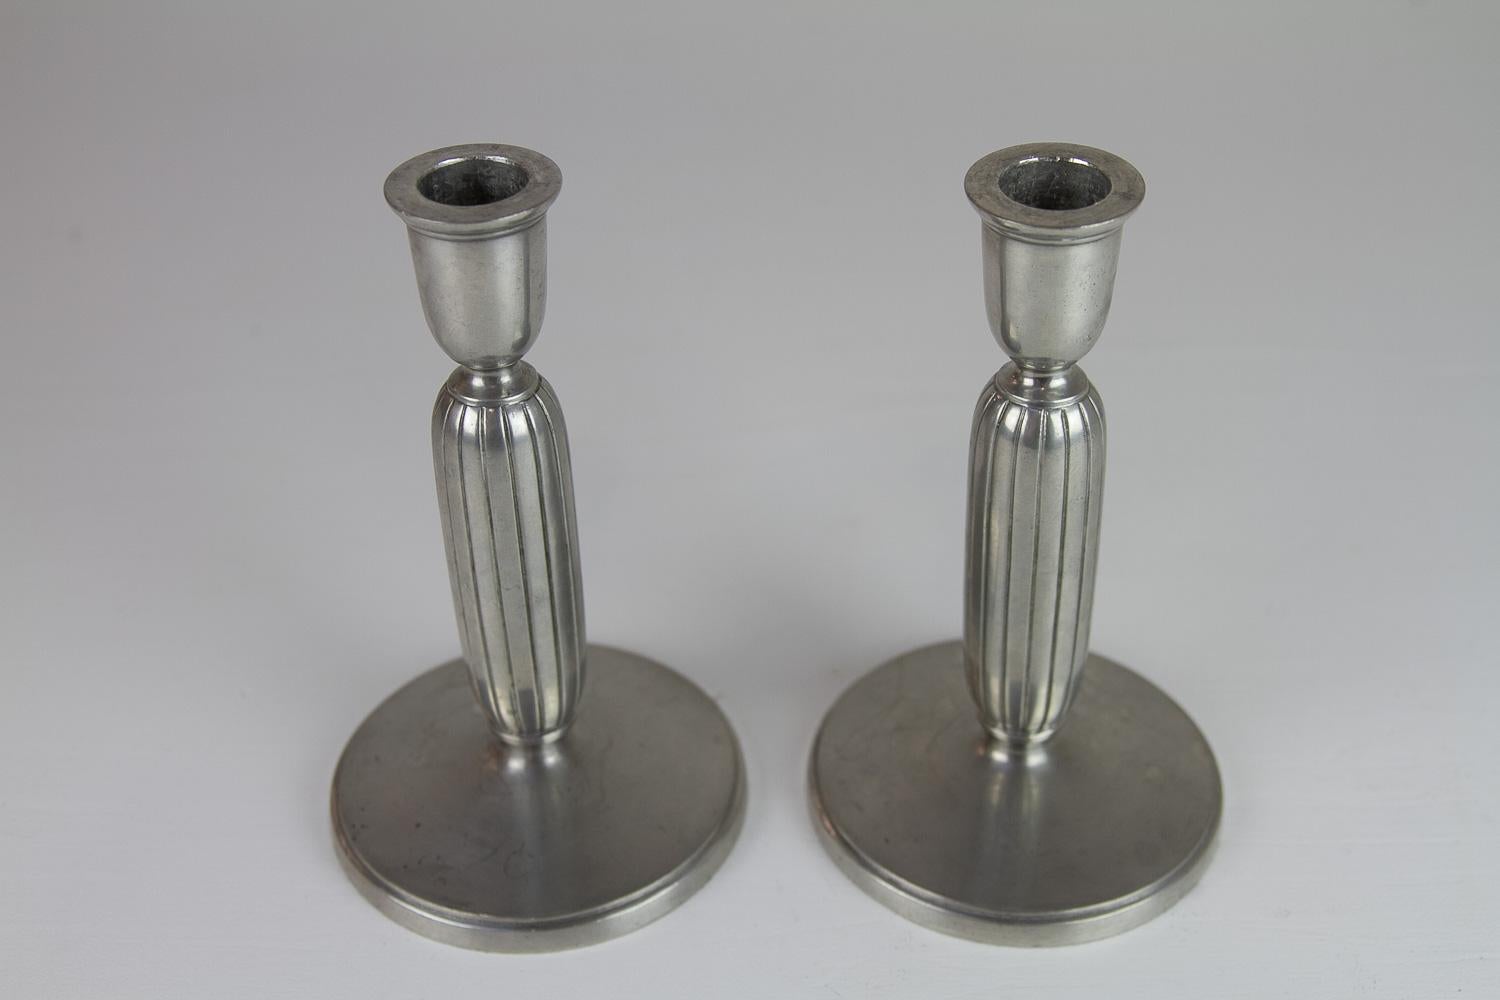 Art Deco Pewter Candle Holders by Just Andersen, 1930s. Set of 2.
Wonderful pair of pewter candlesticks designed by Danish sculptor Just Andersen in Denmark in the 1930s.
Stamped with makers mark and serial number 2574.
Very good original condition.